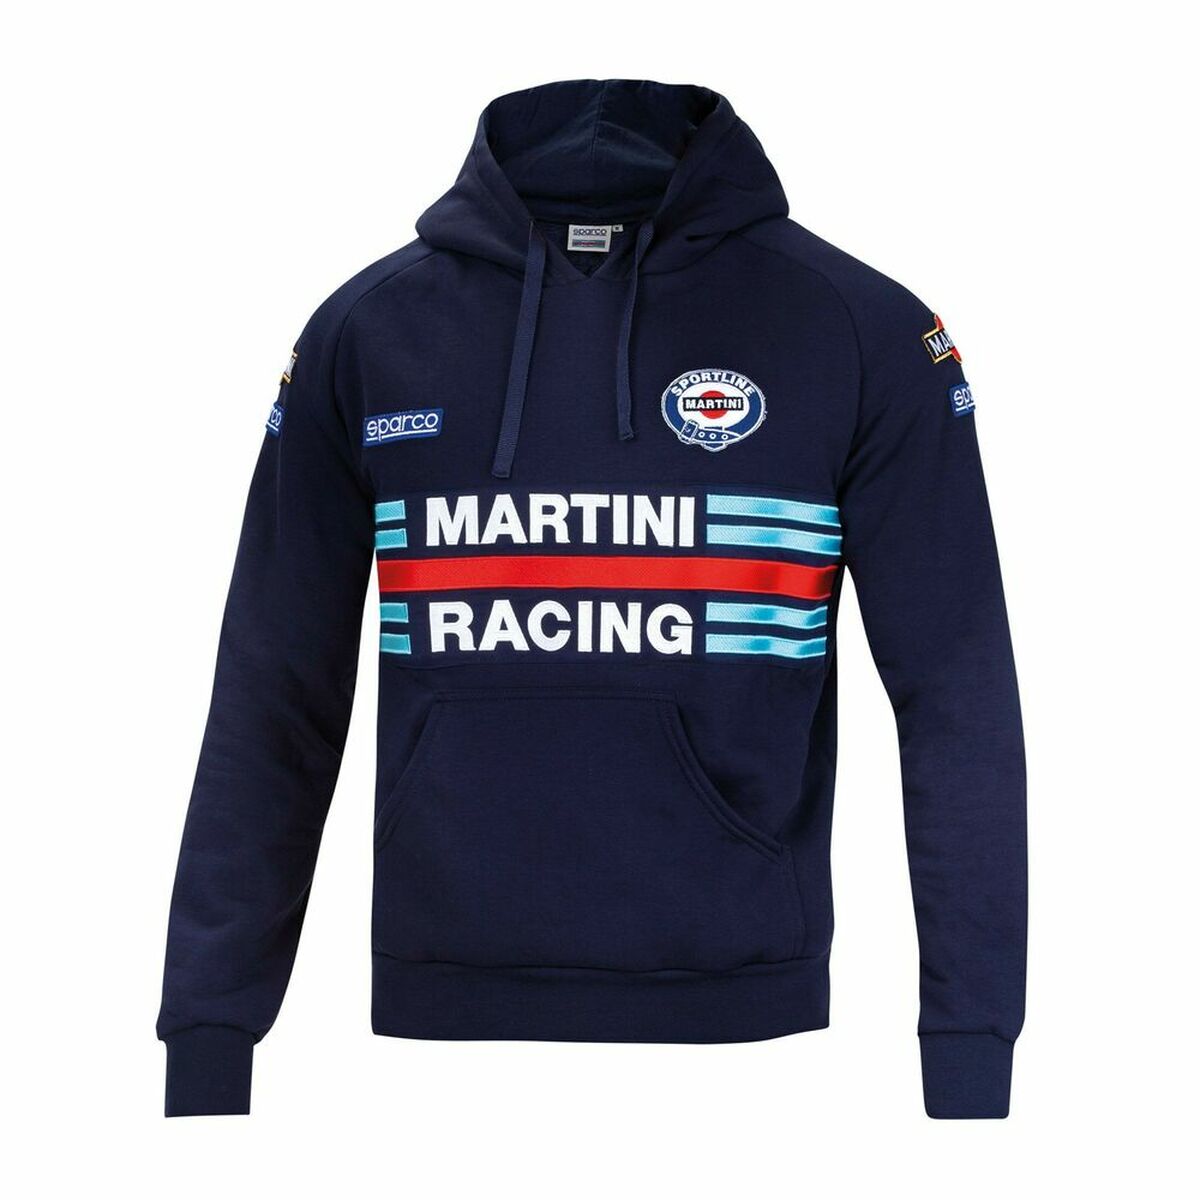 Men’s Hoodie Sparco MARTINI RACING Size L Navy Blue